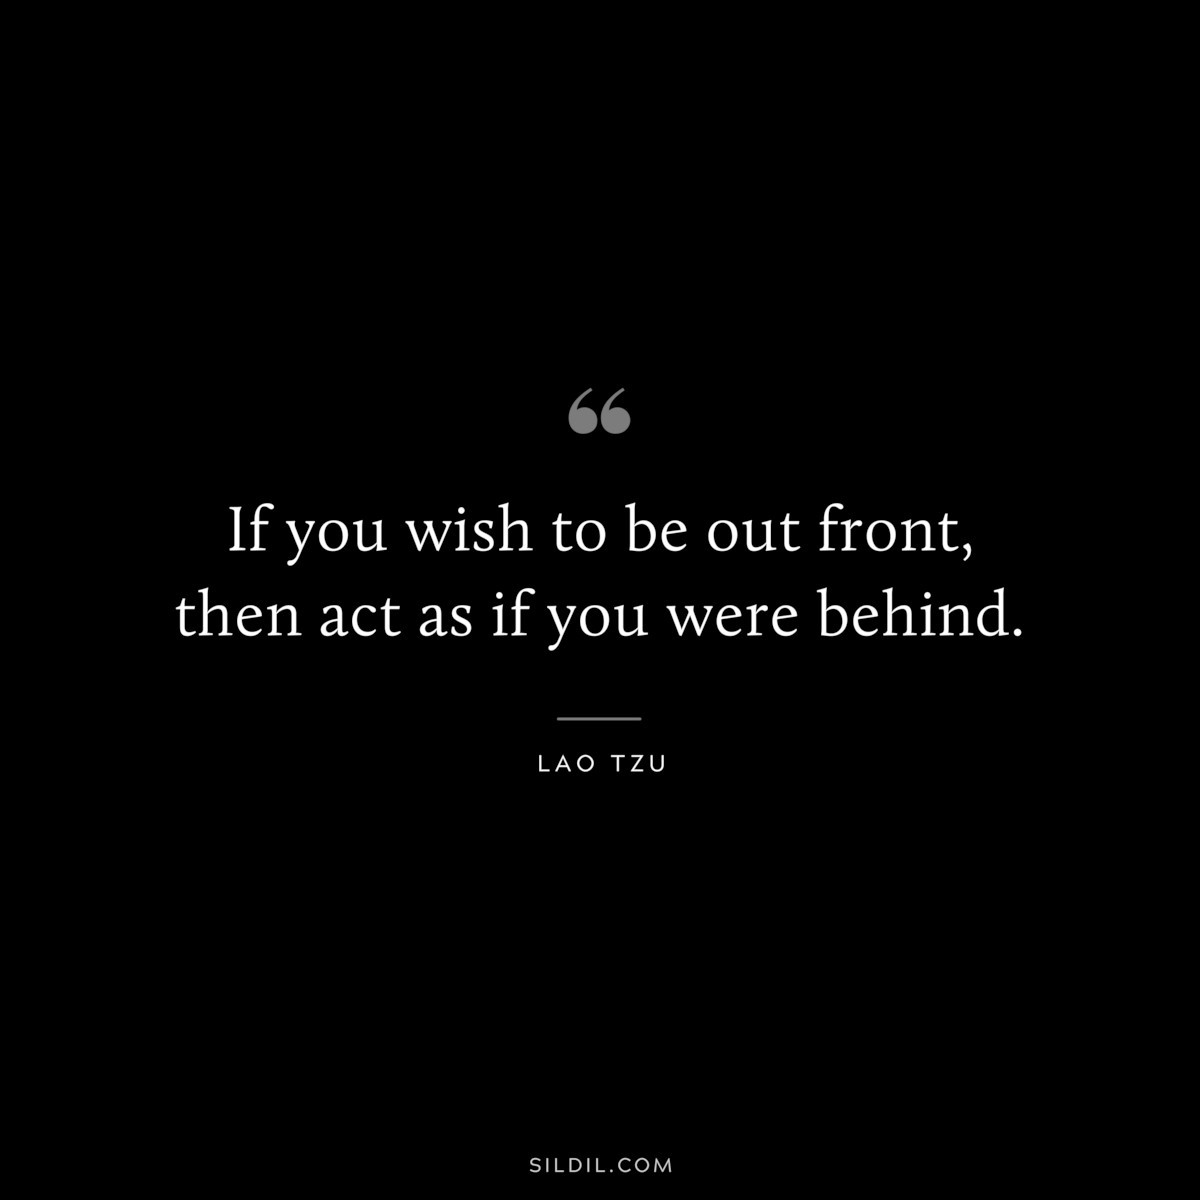 If you wish to be out front, then act as if you were behind. ― Lao Tzu